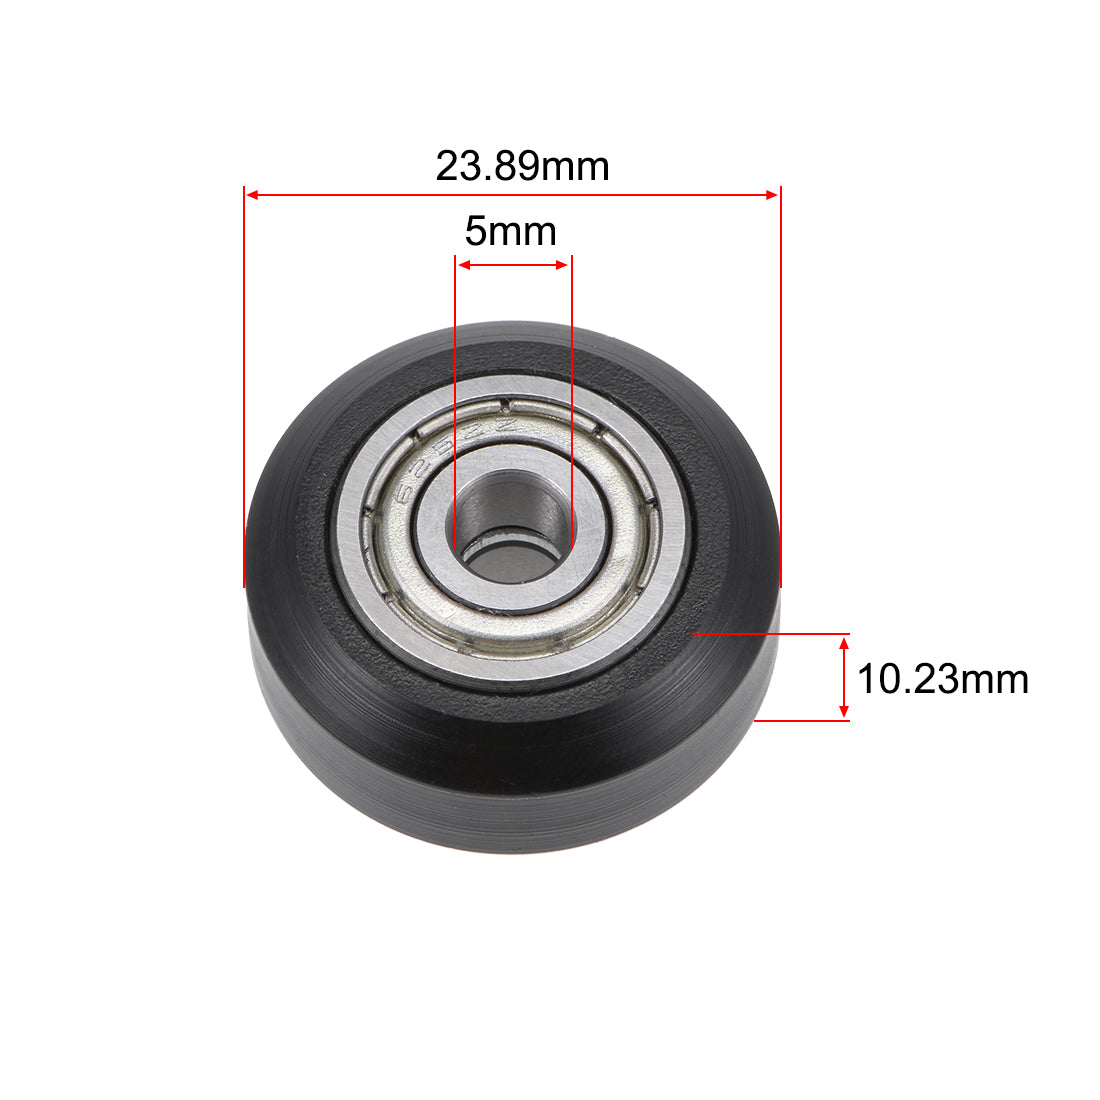 uxcell Uxcell 625ZZ POM Plastic Coated Ball Bearing 5mm I.D. for 3D Printer 2pcs